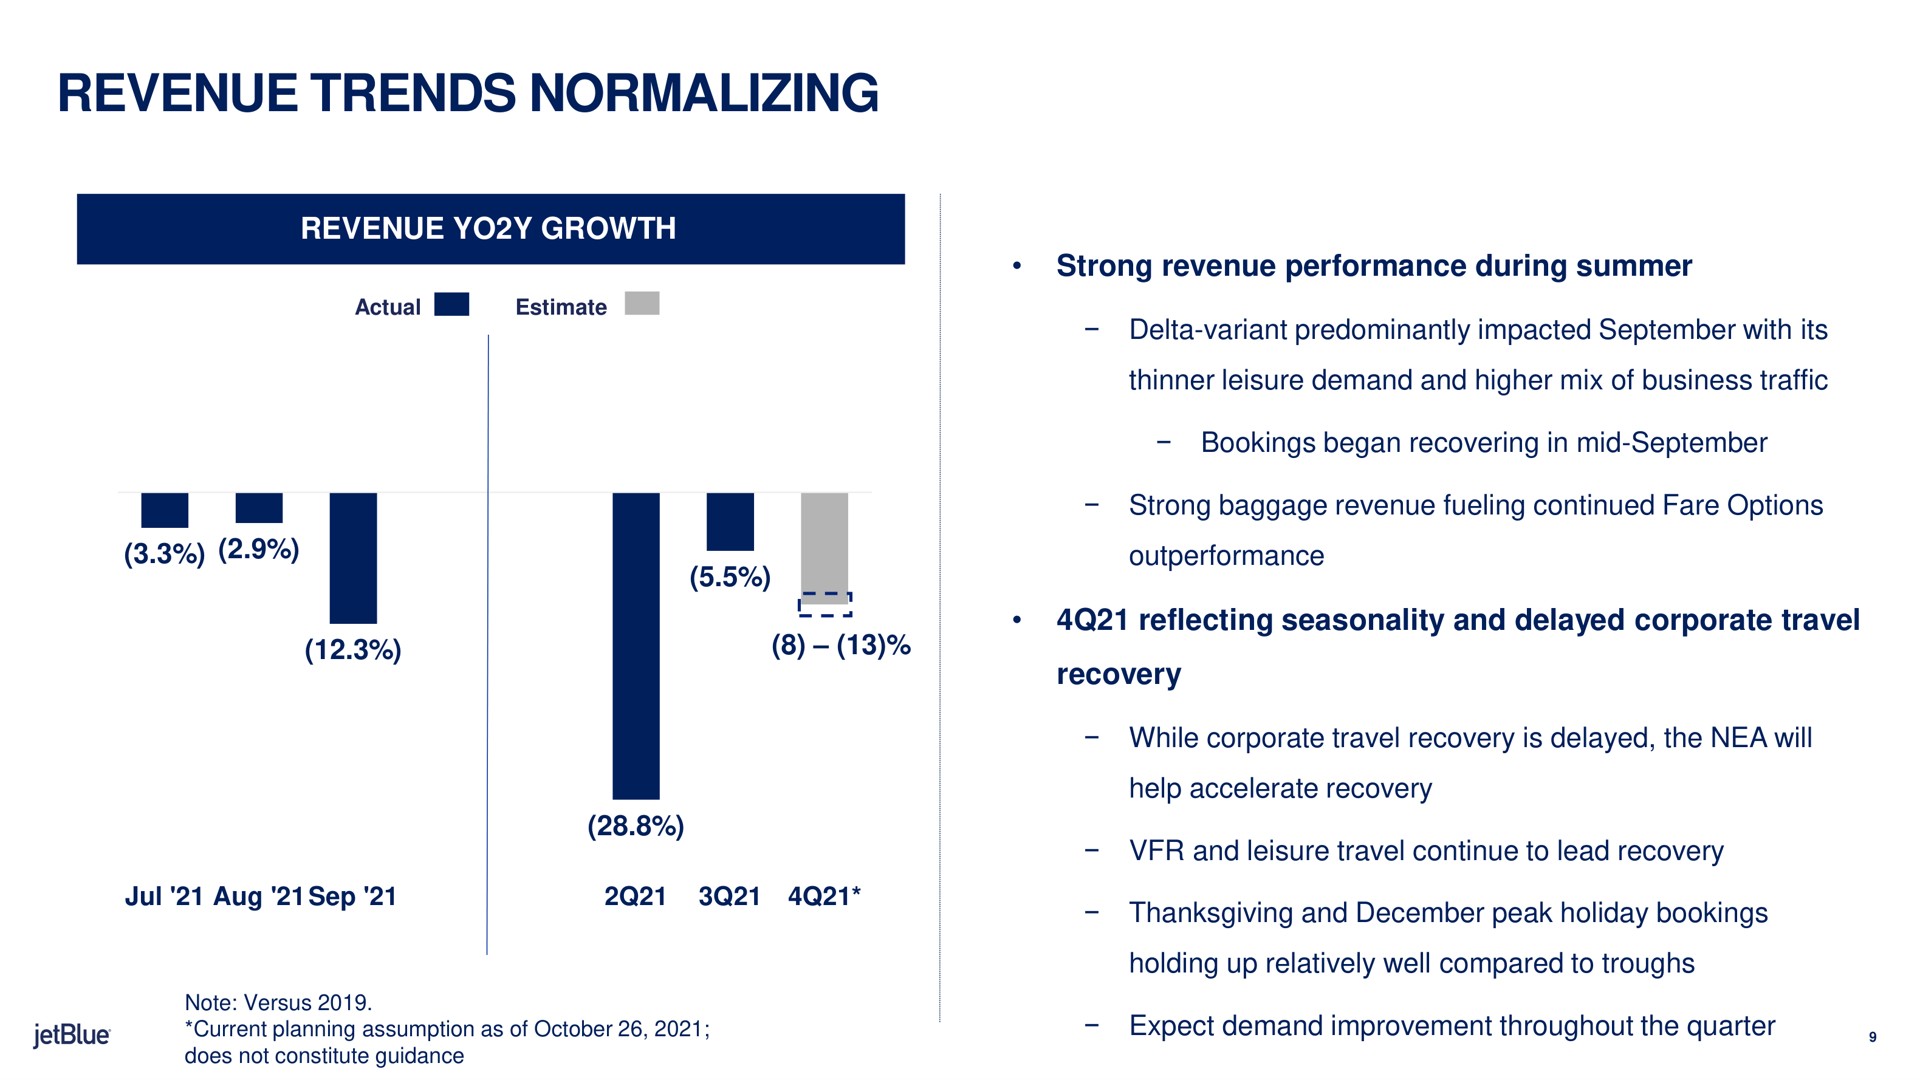 revenue trends normalizing recovery | jetBlue